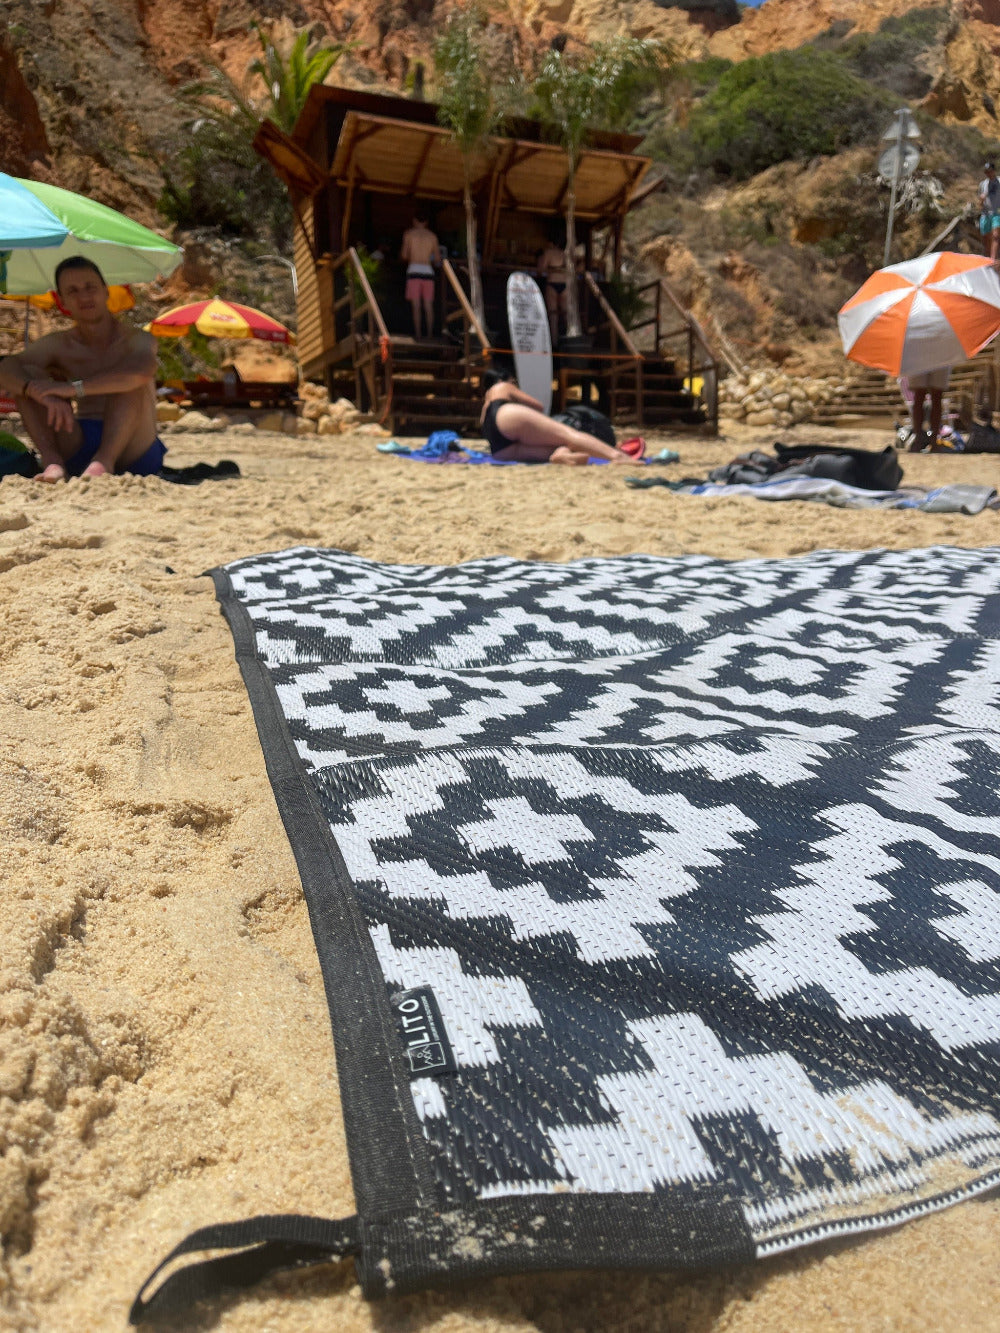 Waterproof Outdoor Camping Rug  - Reversible, Black and White